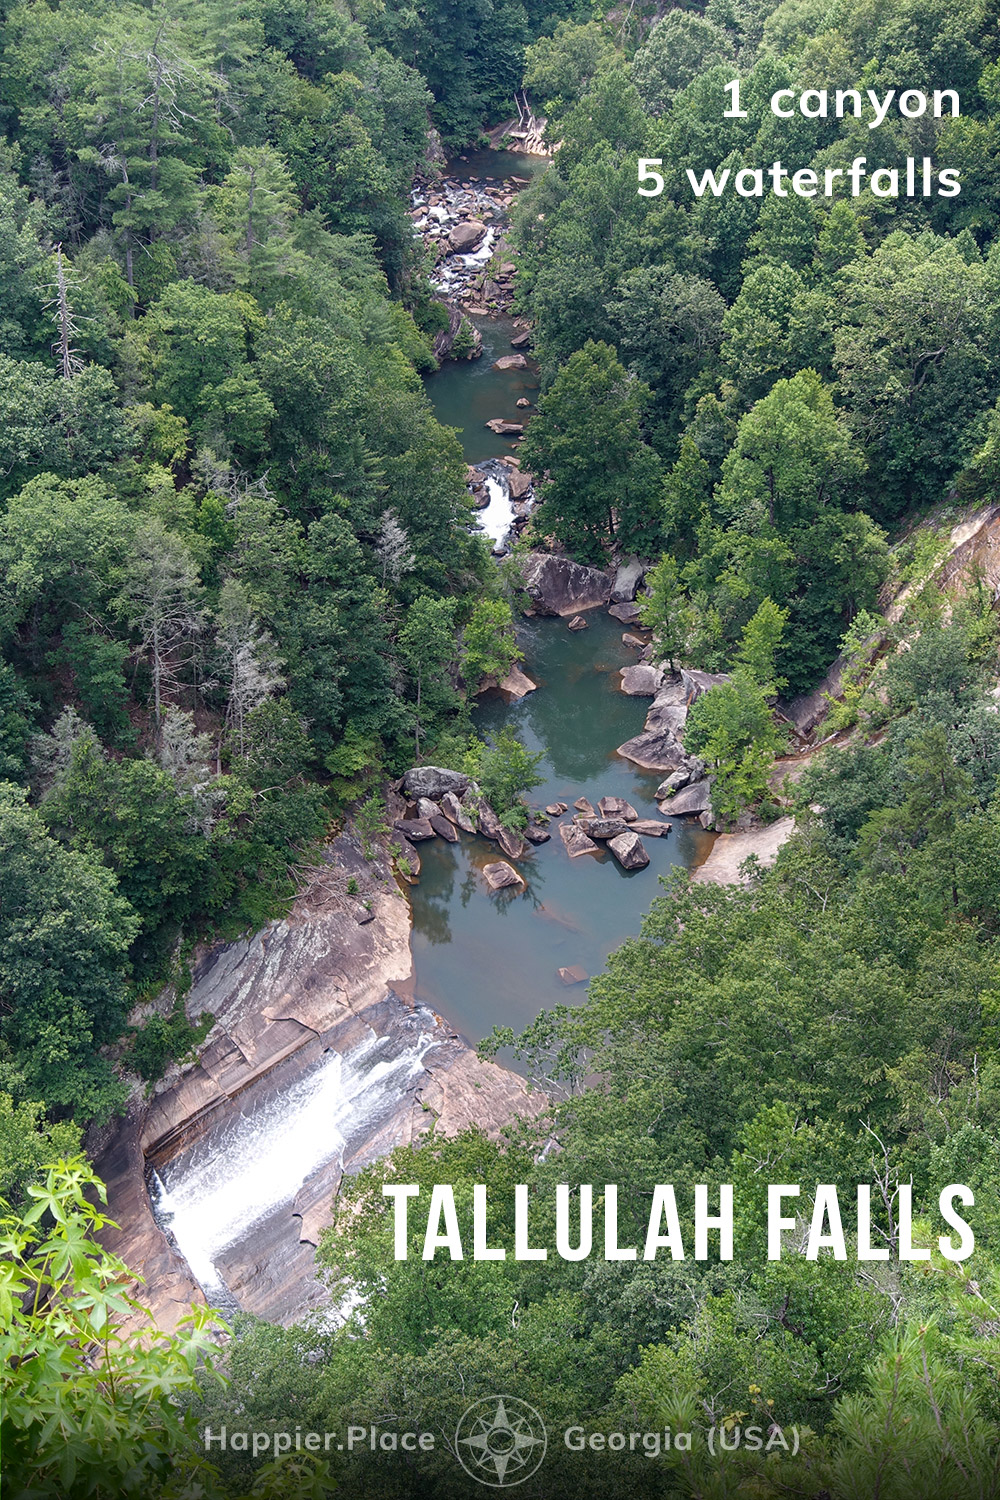 Tallulah Falls in the Tallulah Gorge State Park, Georgia, USA, waterfalls, river, canyon, Happier Place